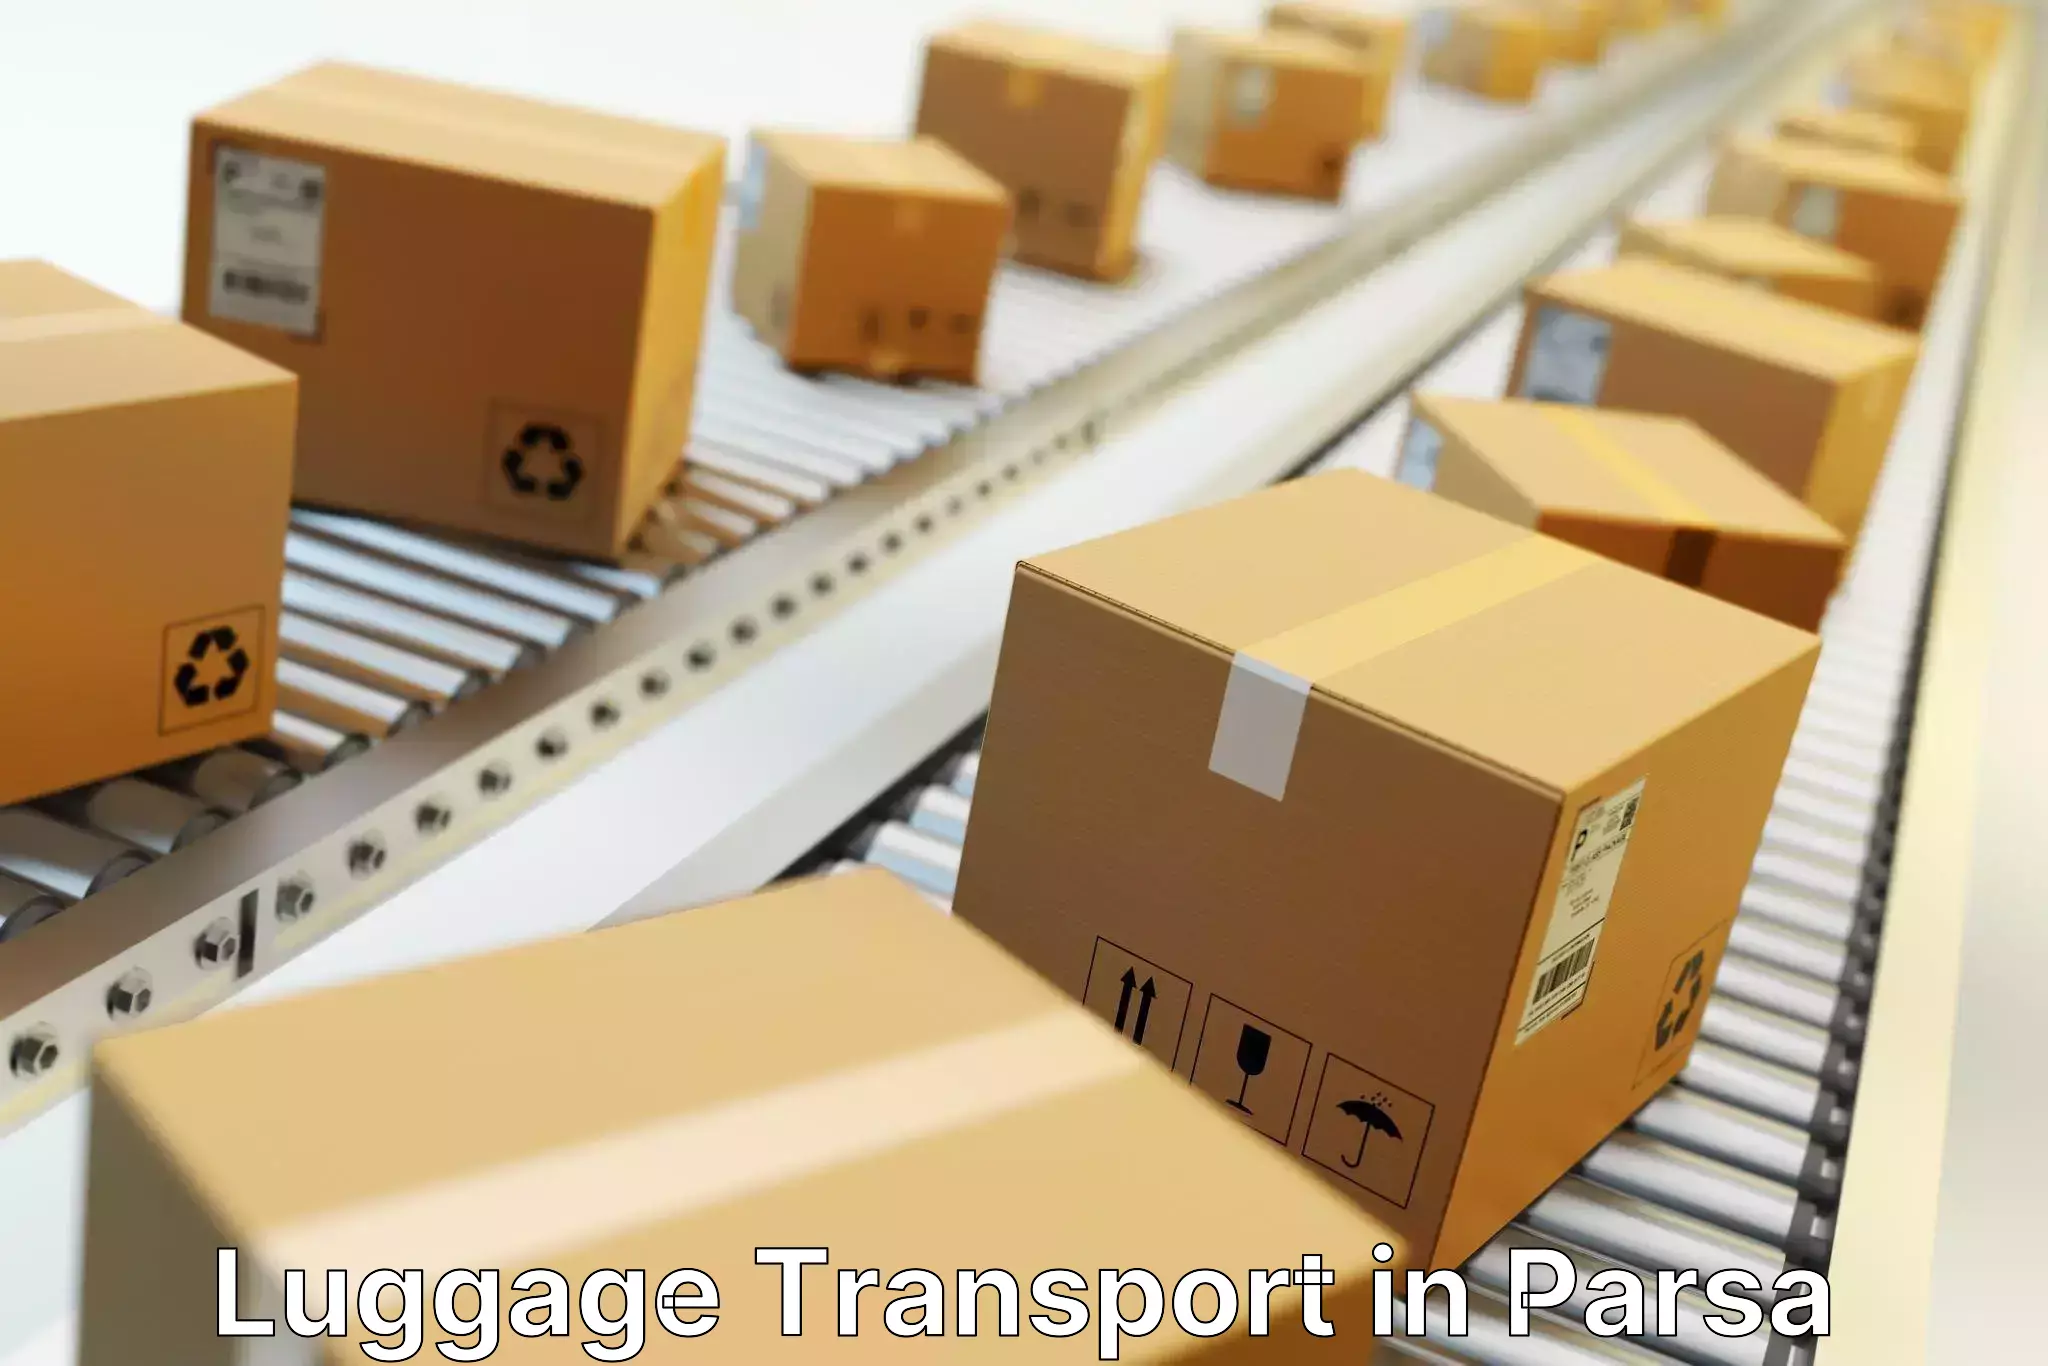 Luggage shipment strategy in Parsa